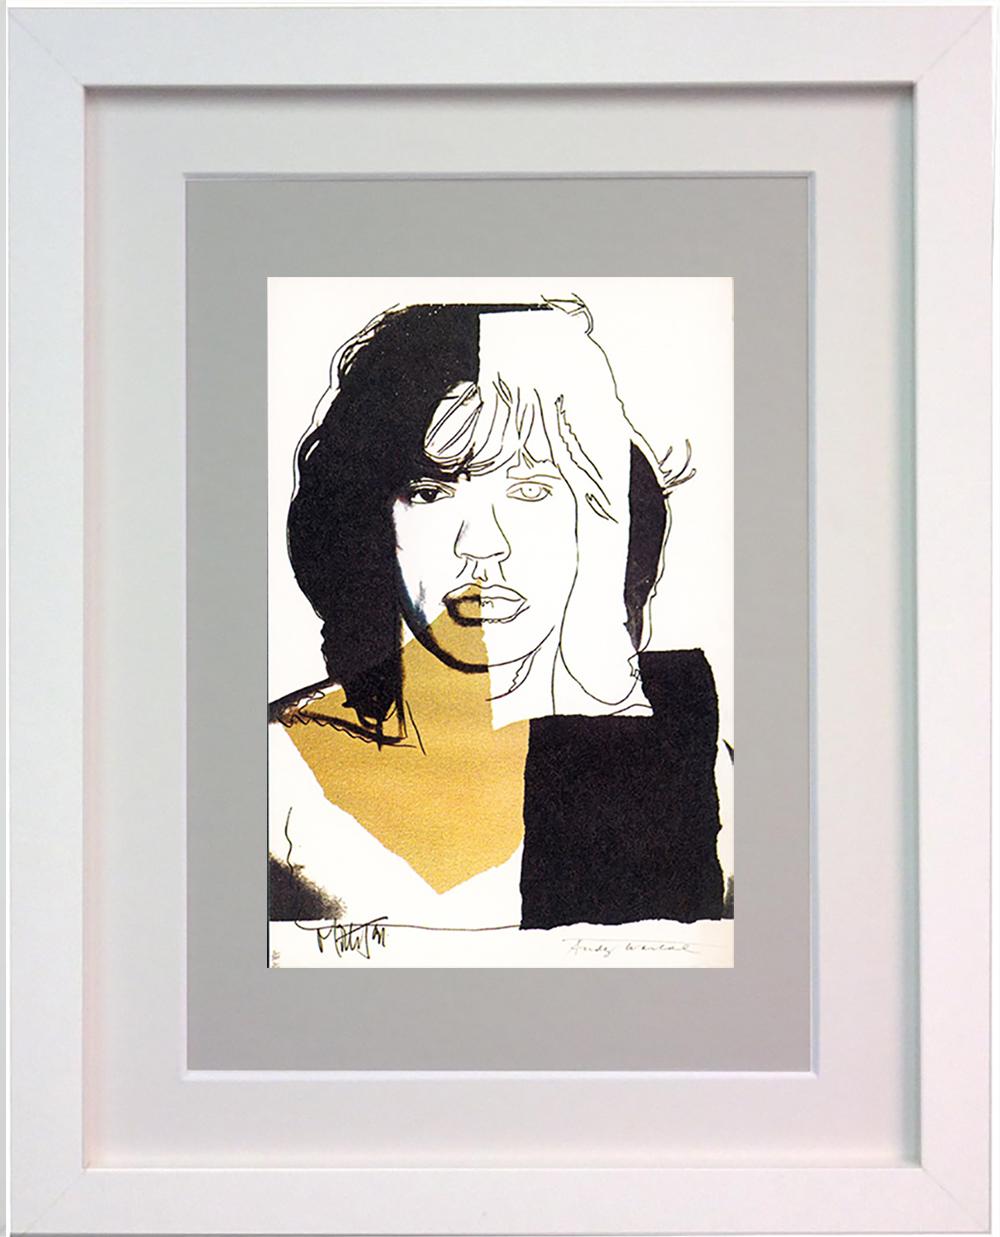 (after) Andy Warhol Figurative Print - Andy Warhol, 'Mick Jagger FSII.146', Framed Announcement-card, 1975